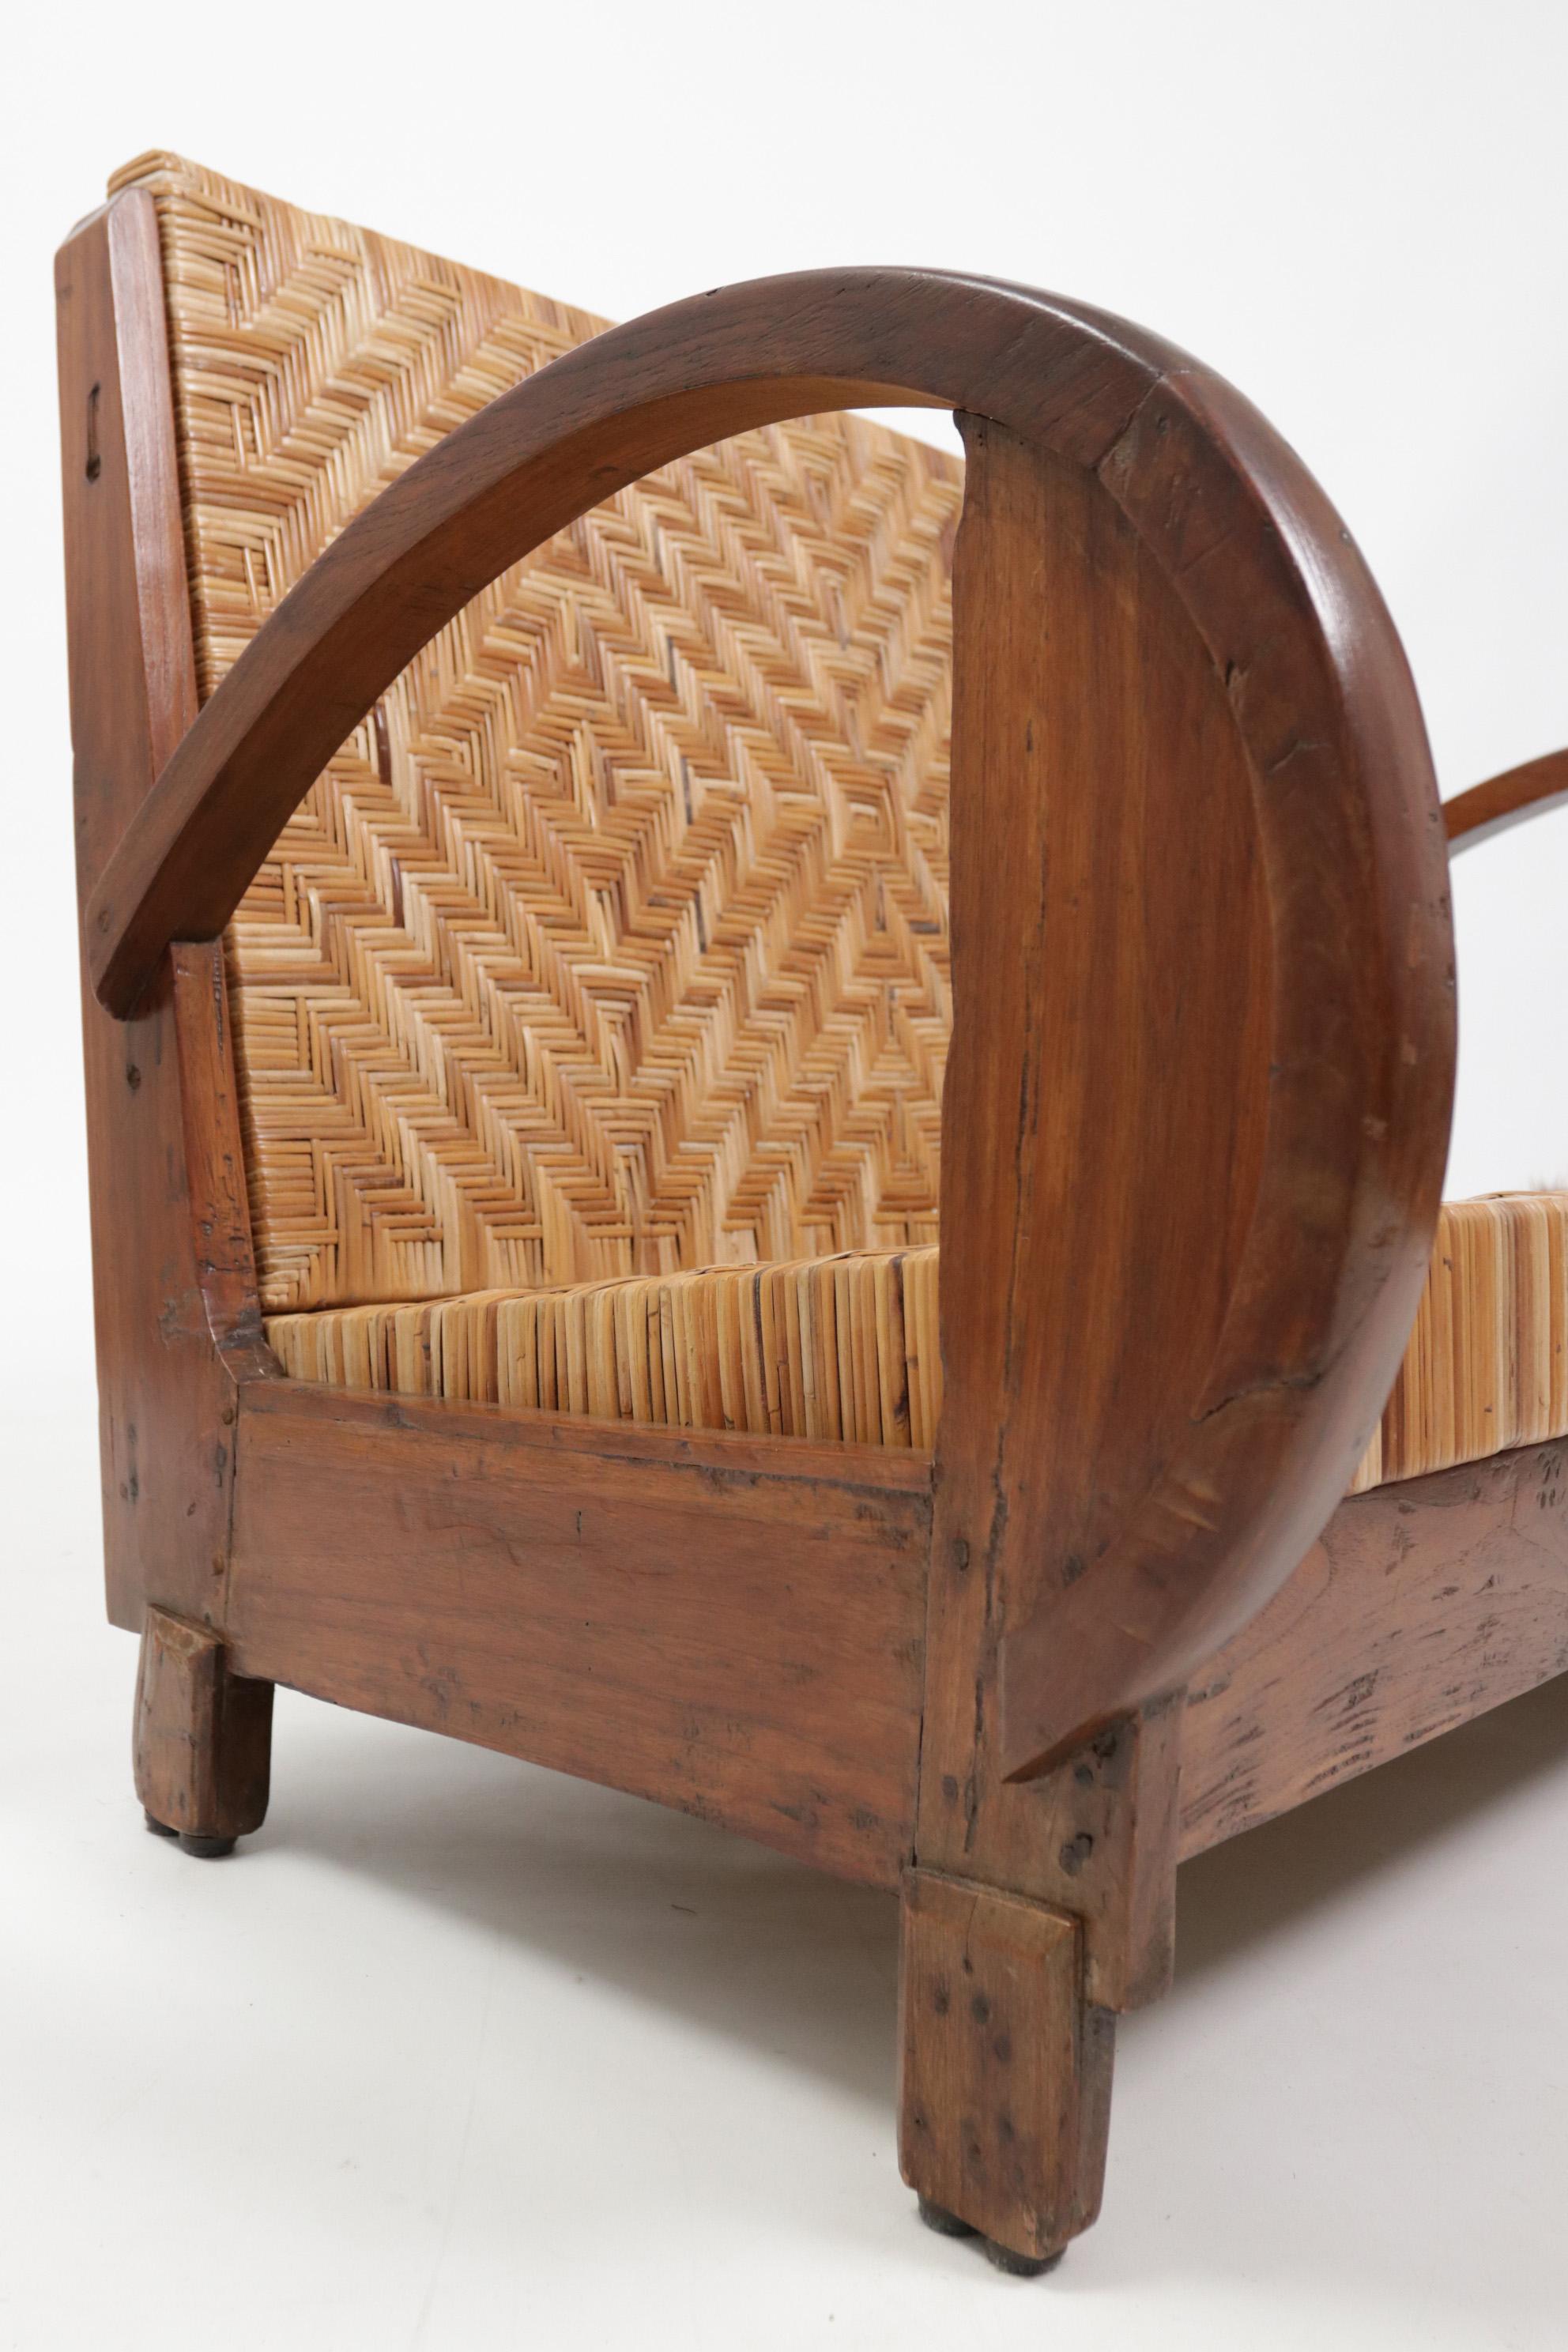 Early 20th Century British Colonial Rattan and Wood Art Deco Lounge Sofa, c. 1920s